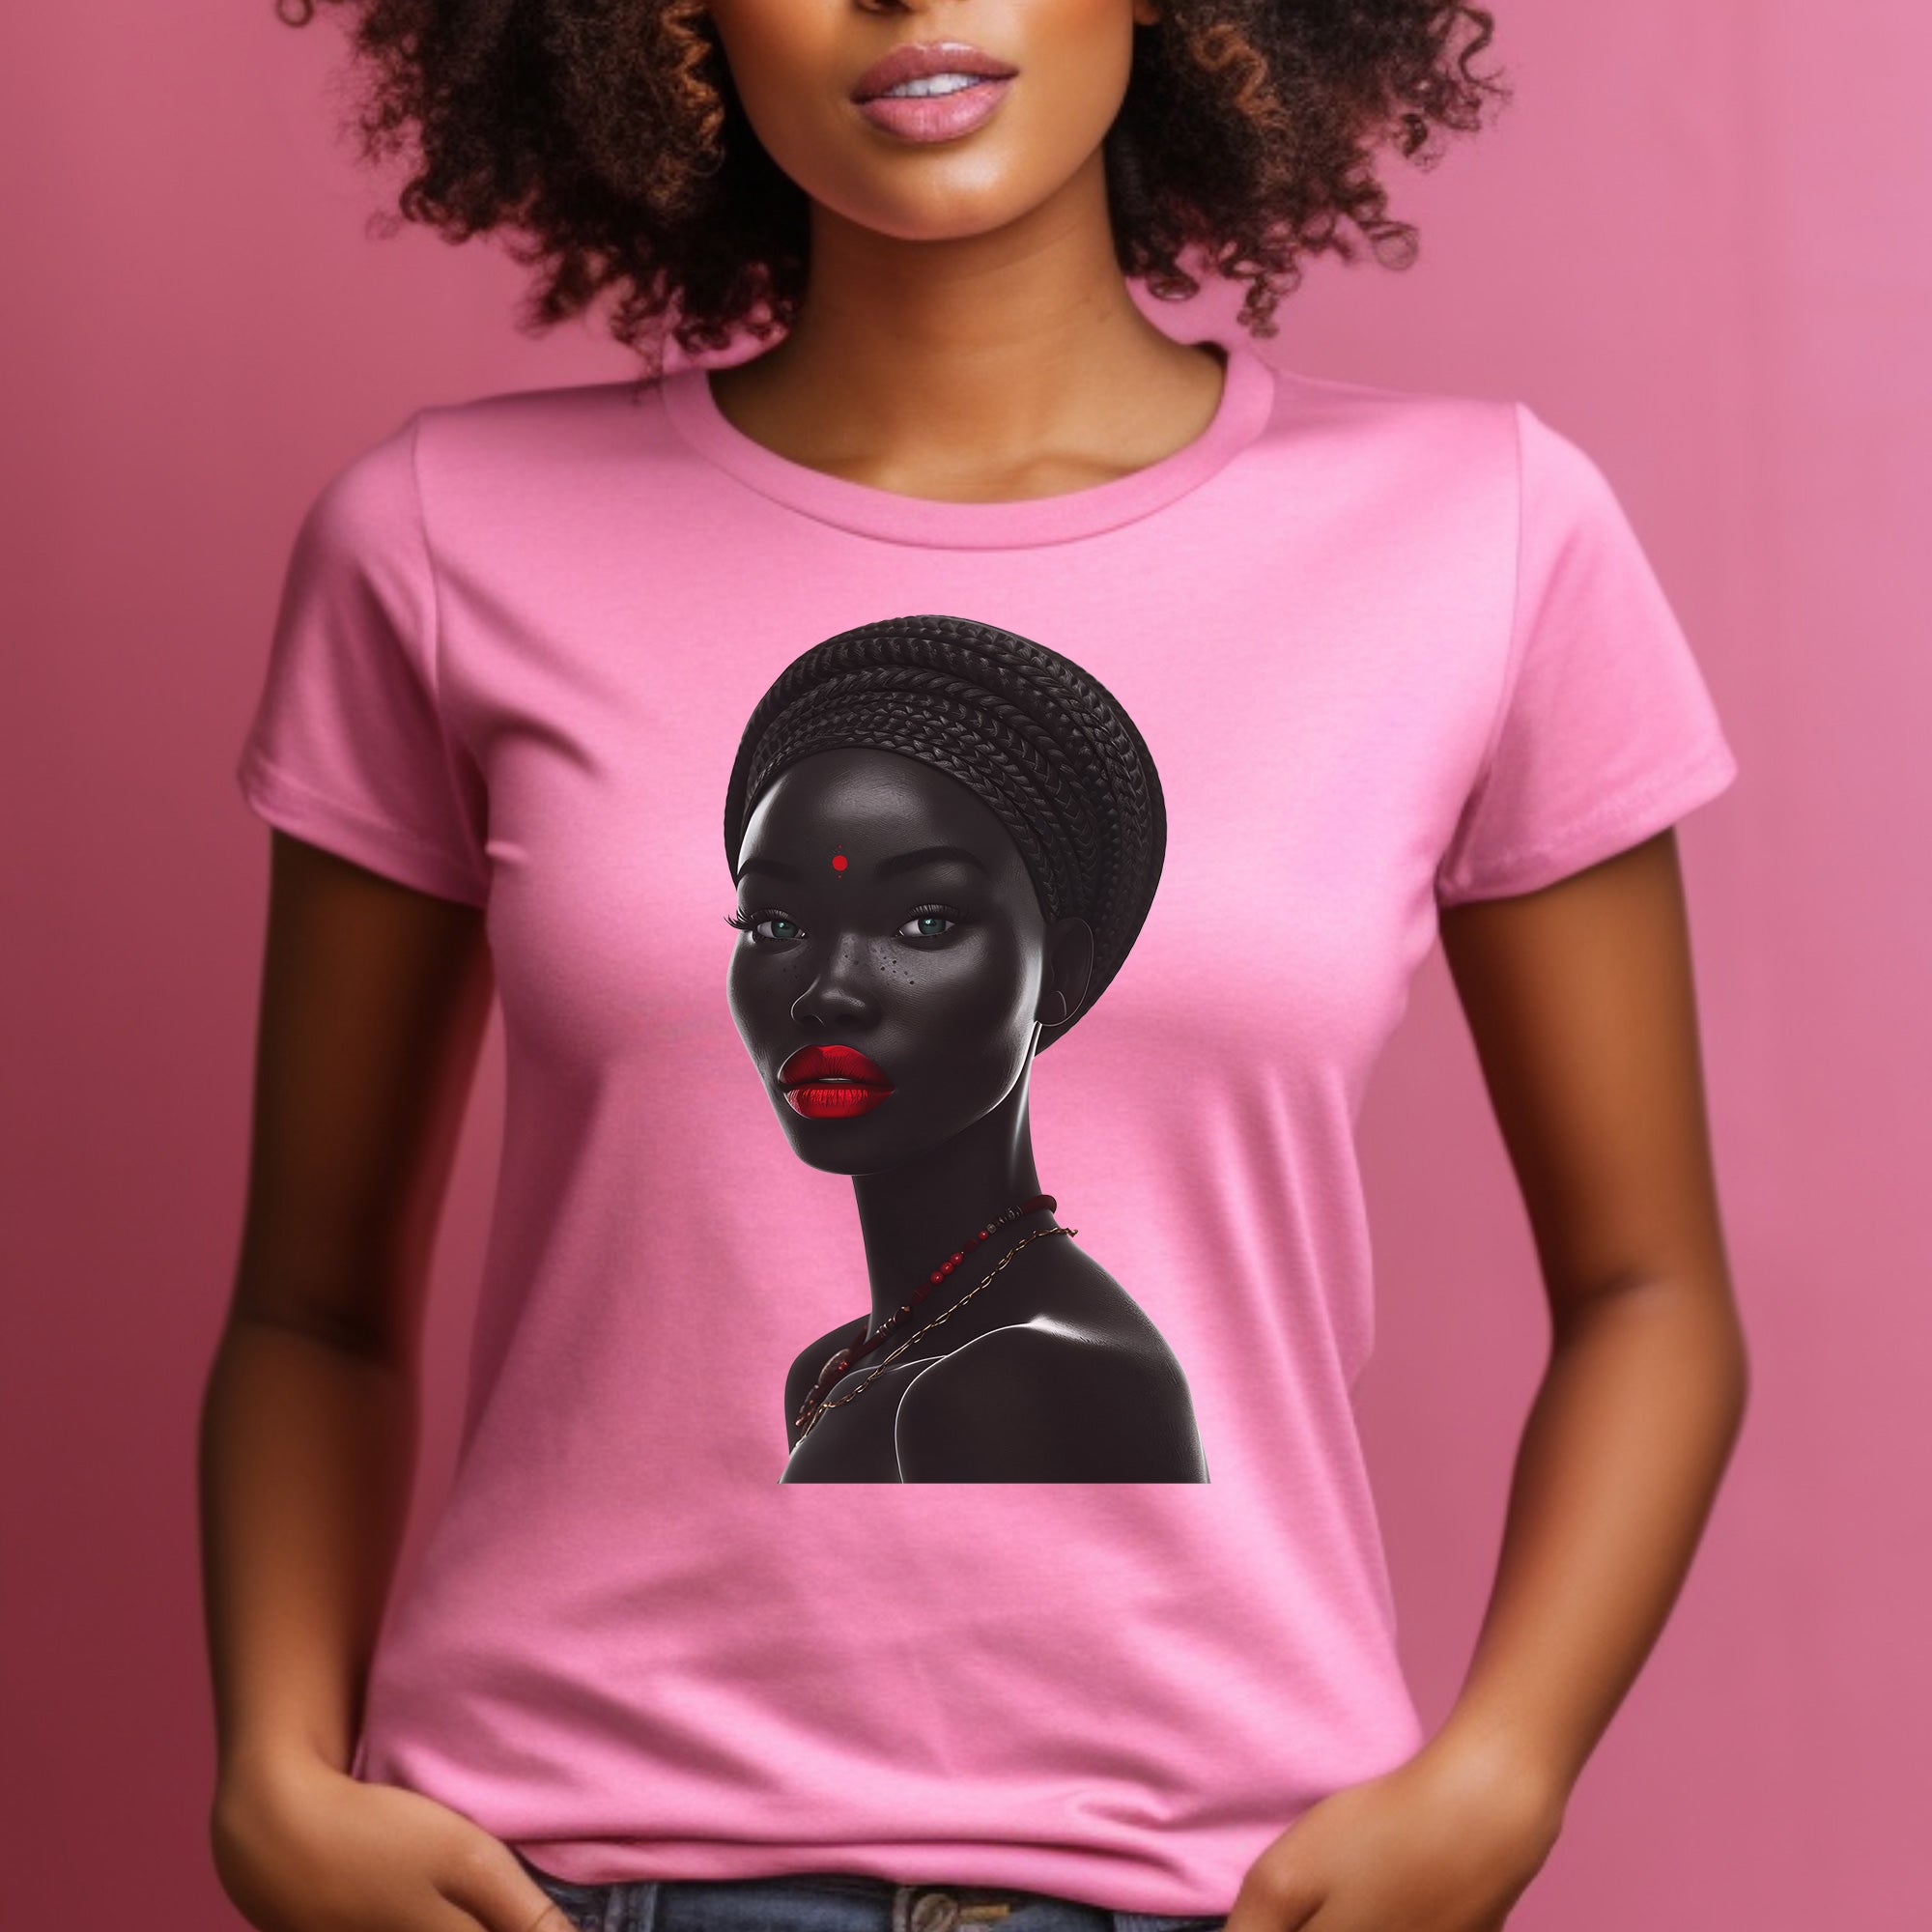 Afrocentric Black Beauty Tee Shirt on model.